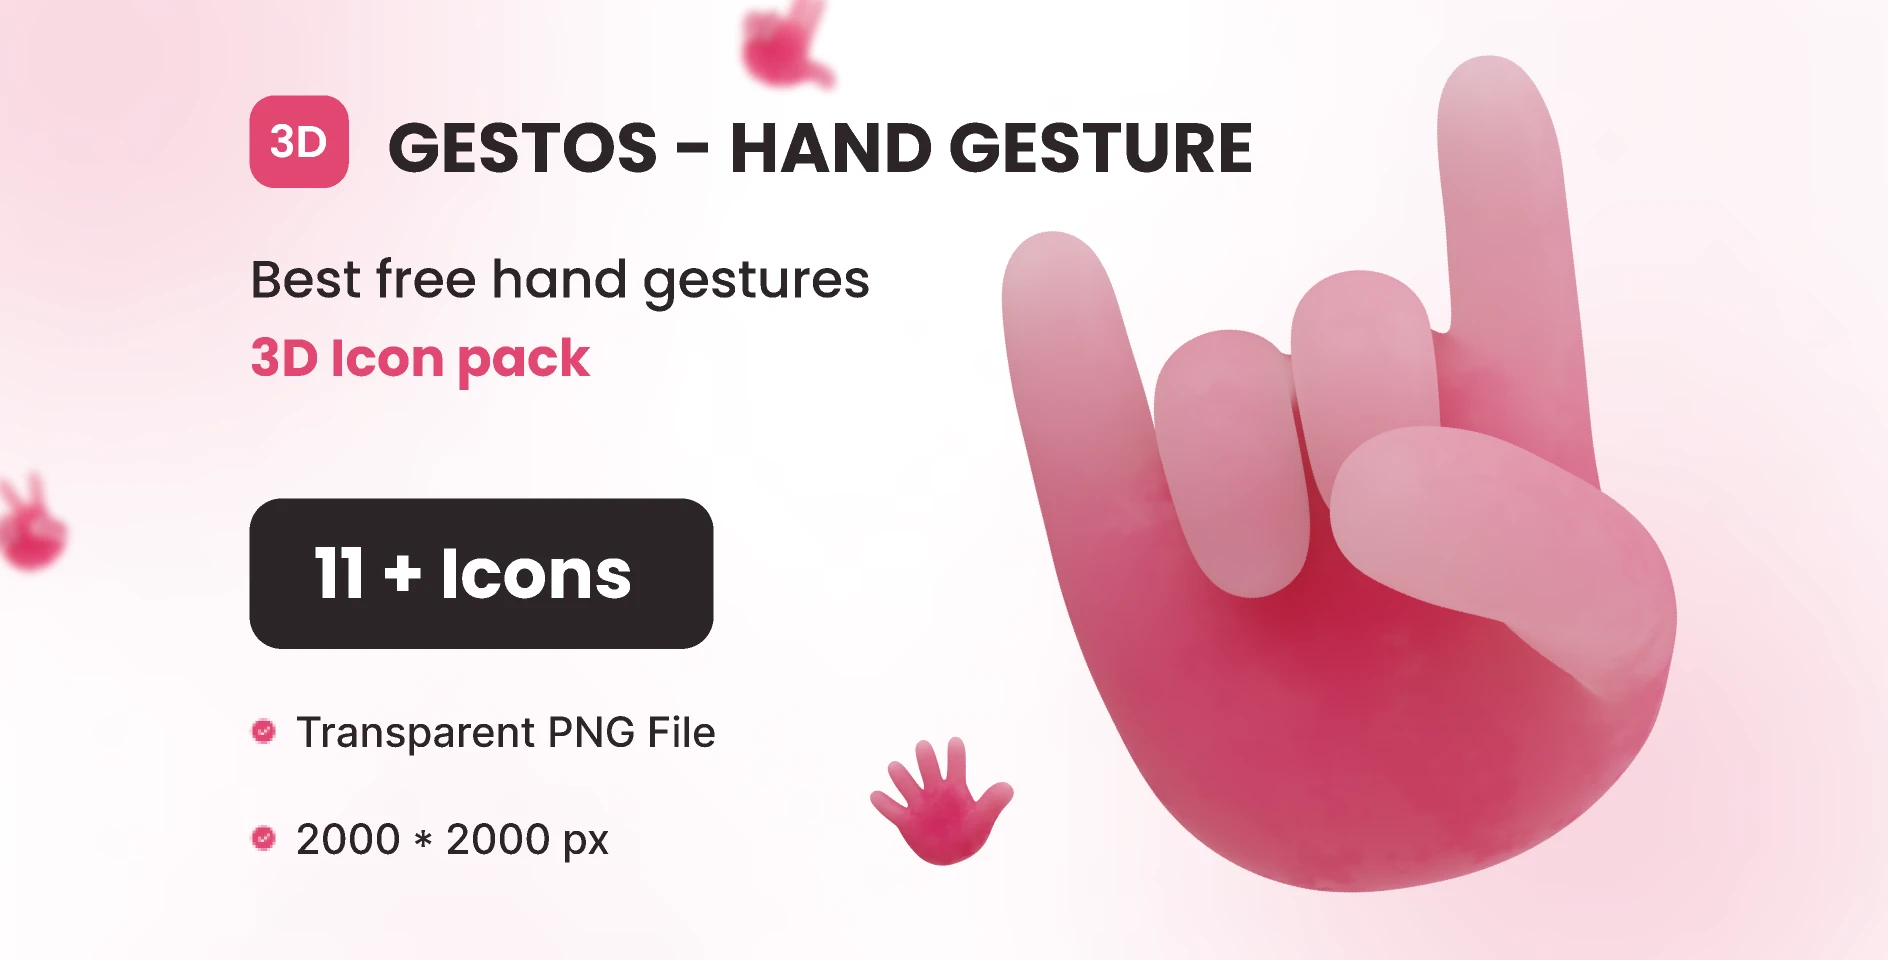 Gestos - Hand Gesture Best free hand gestures 3D Icon pack for Figma and Adobe XD